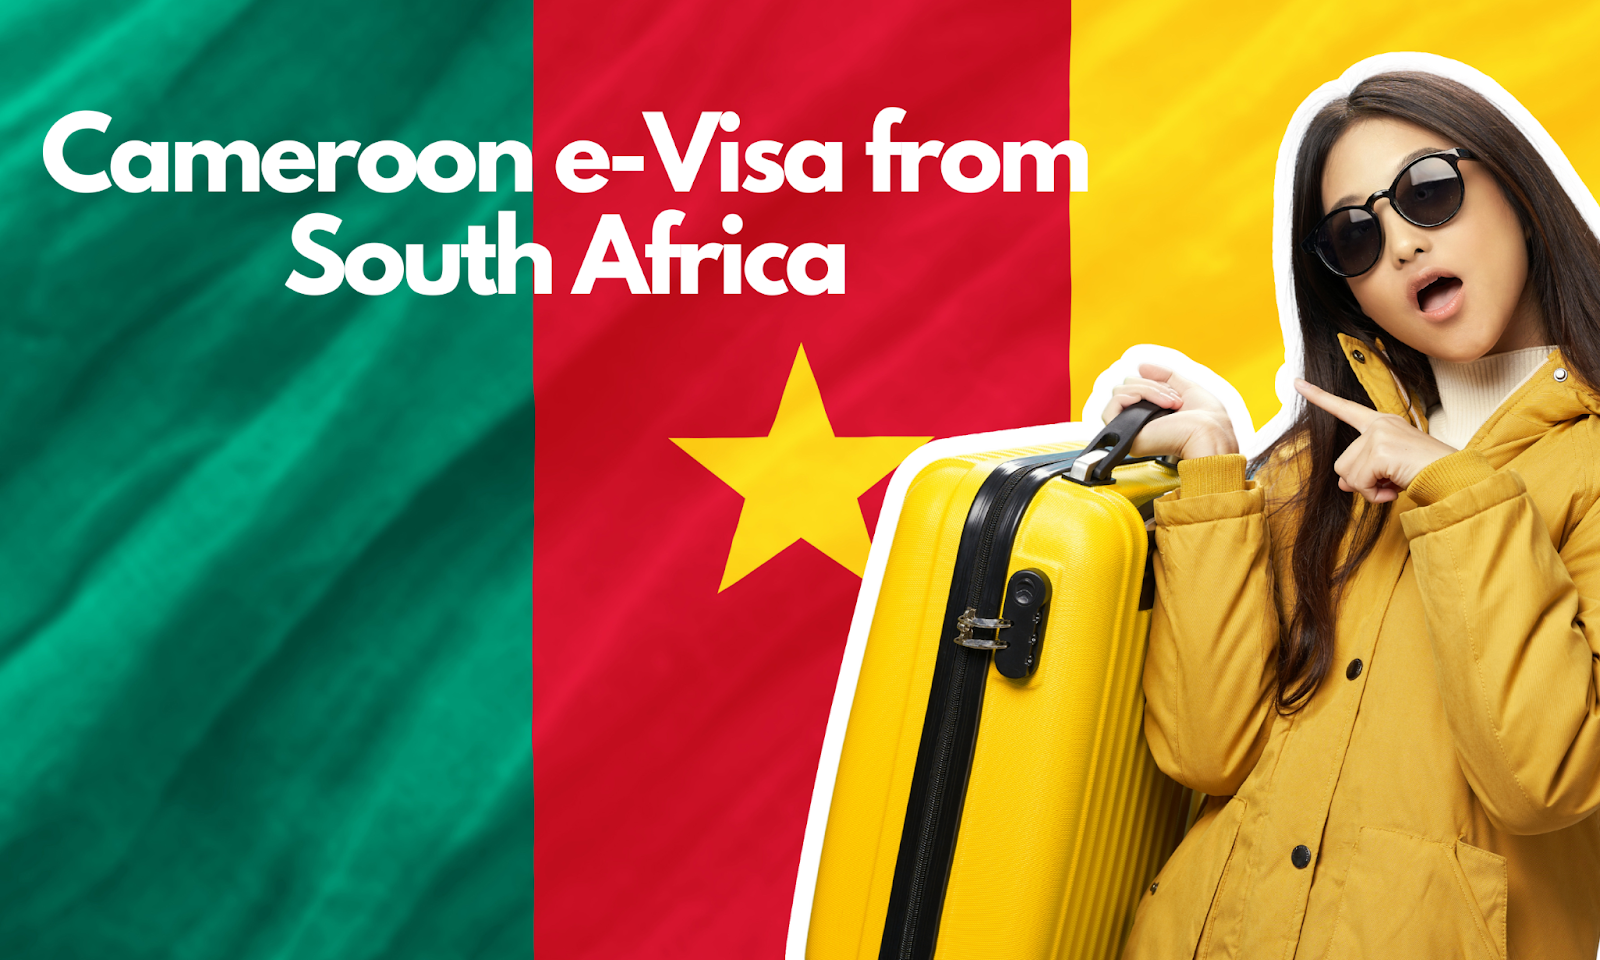 Cameroon e-Visa from South Africa